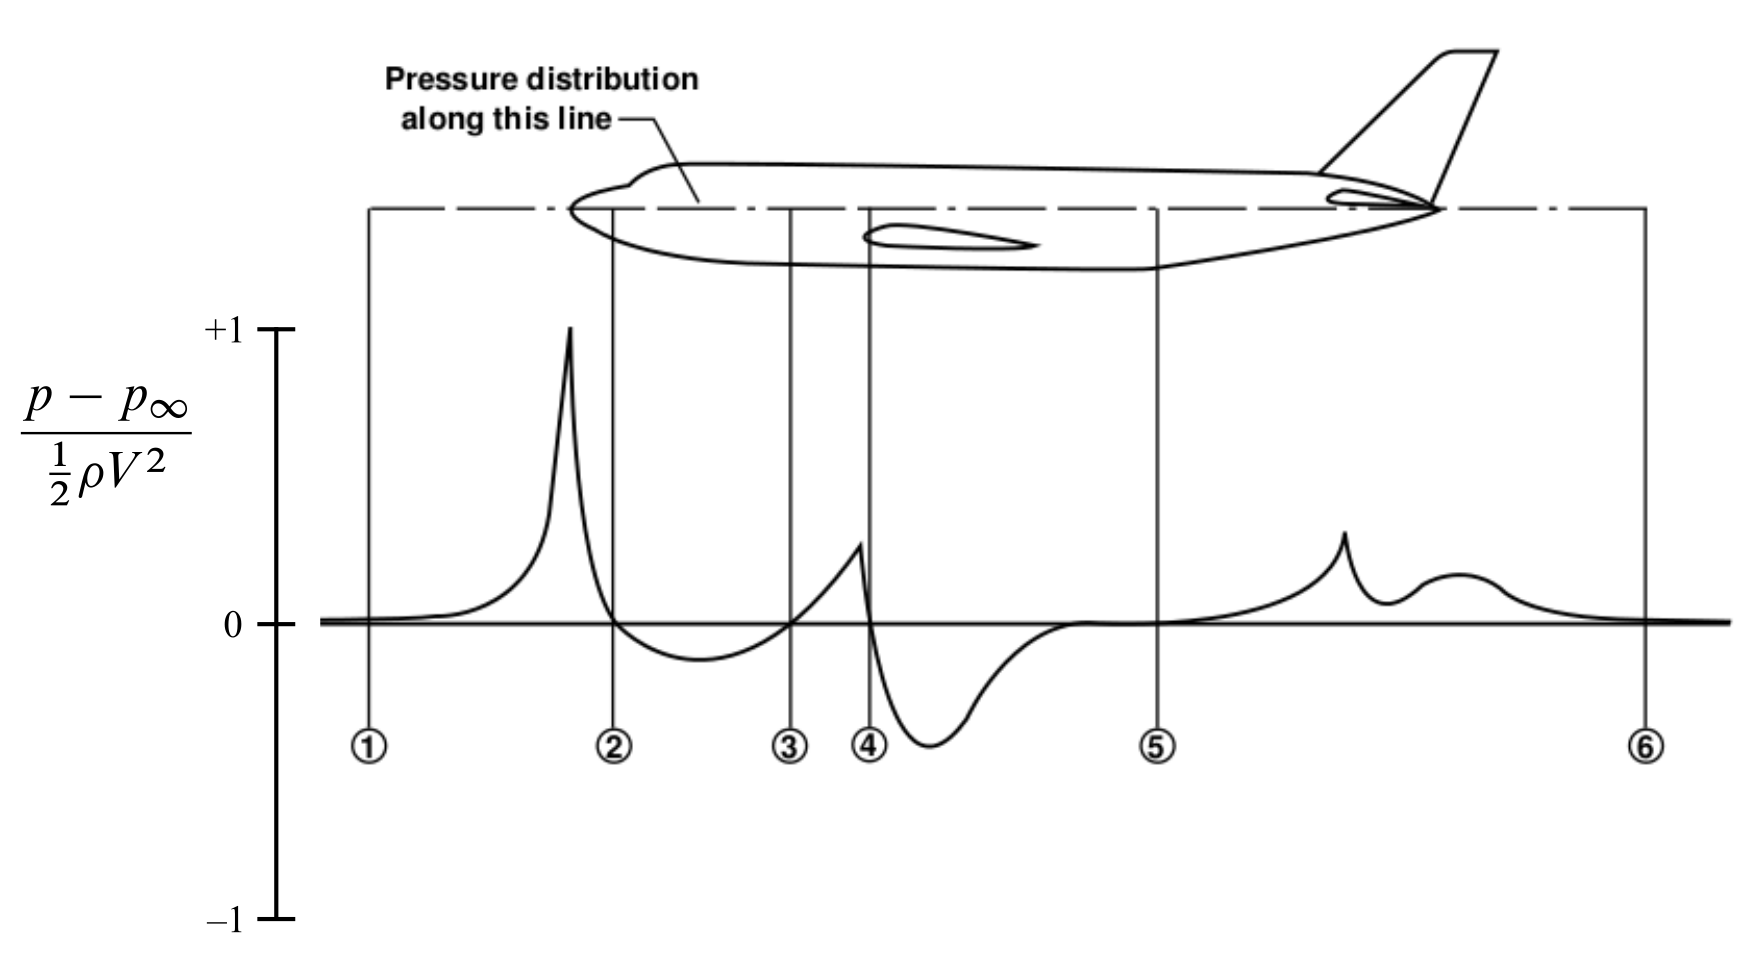 Static pressure $p$ along the fuselage as a nondimensional difference with respect to the freestream static pressure $p_\infty$. Positioning criterion for static probes. Points 2, 3, 4 and 5.